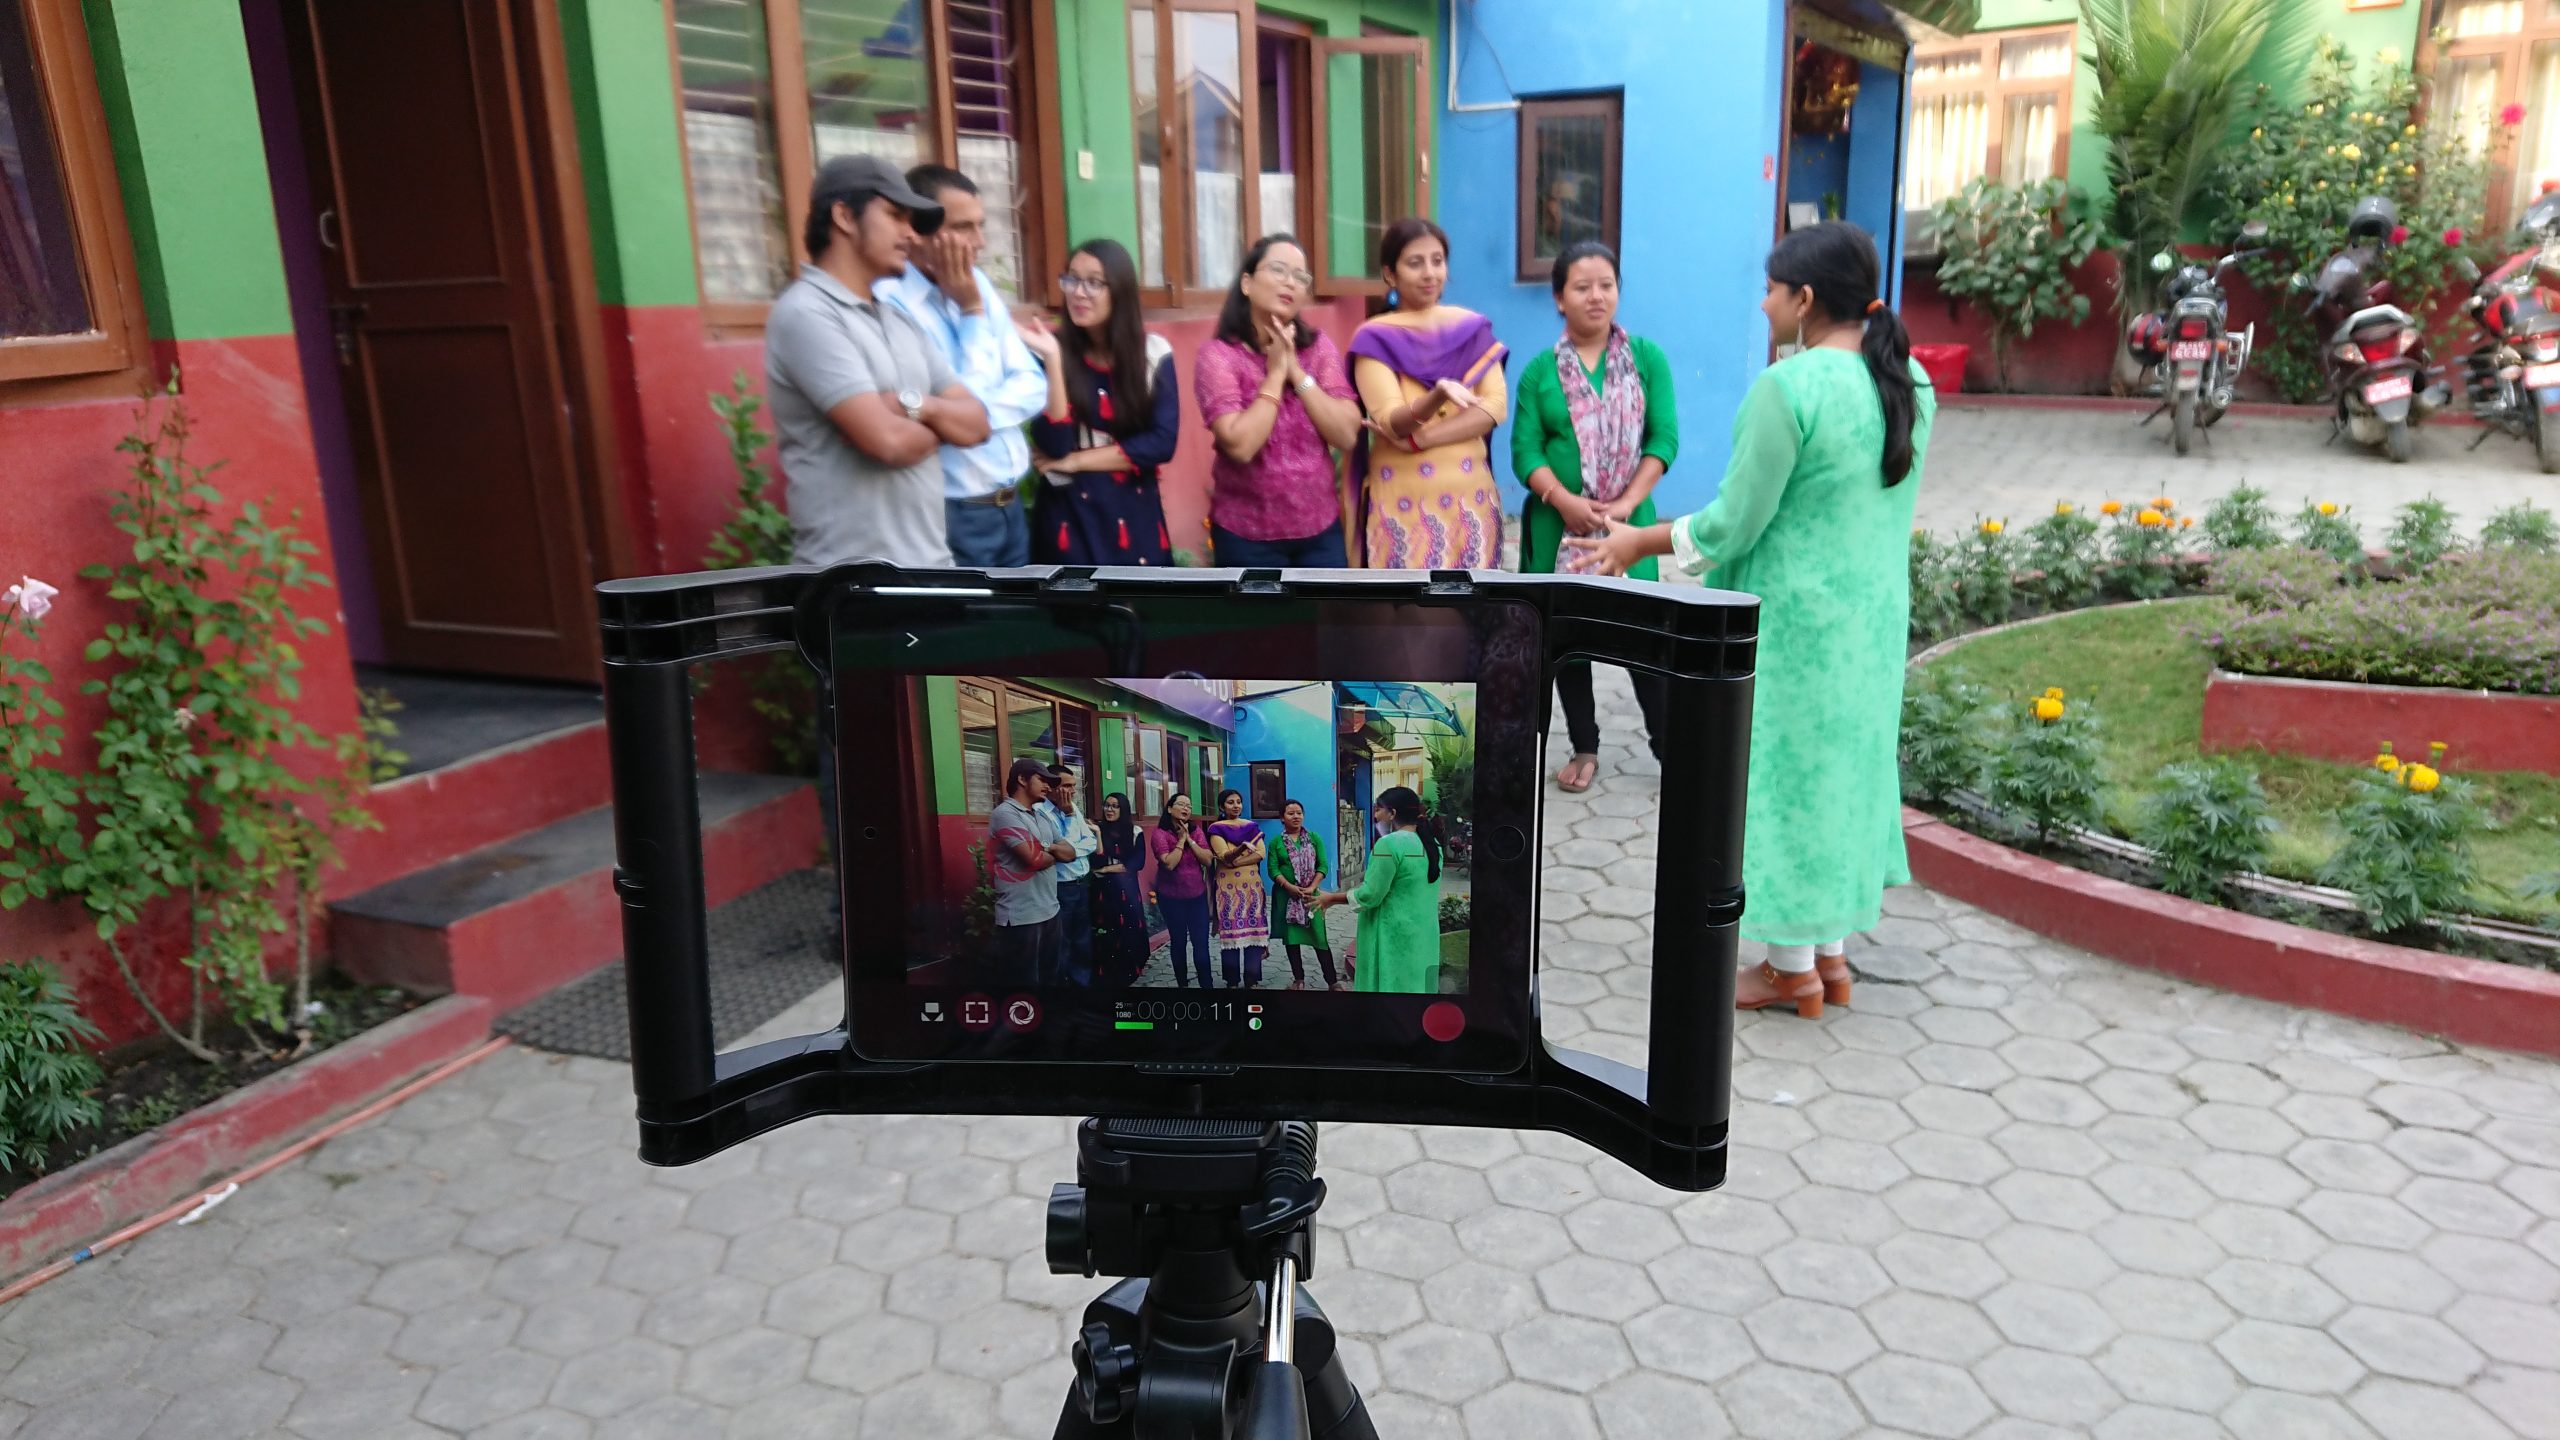 7 trainees stand in front of an iPad mounted on a tripod in a courtyard